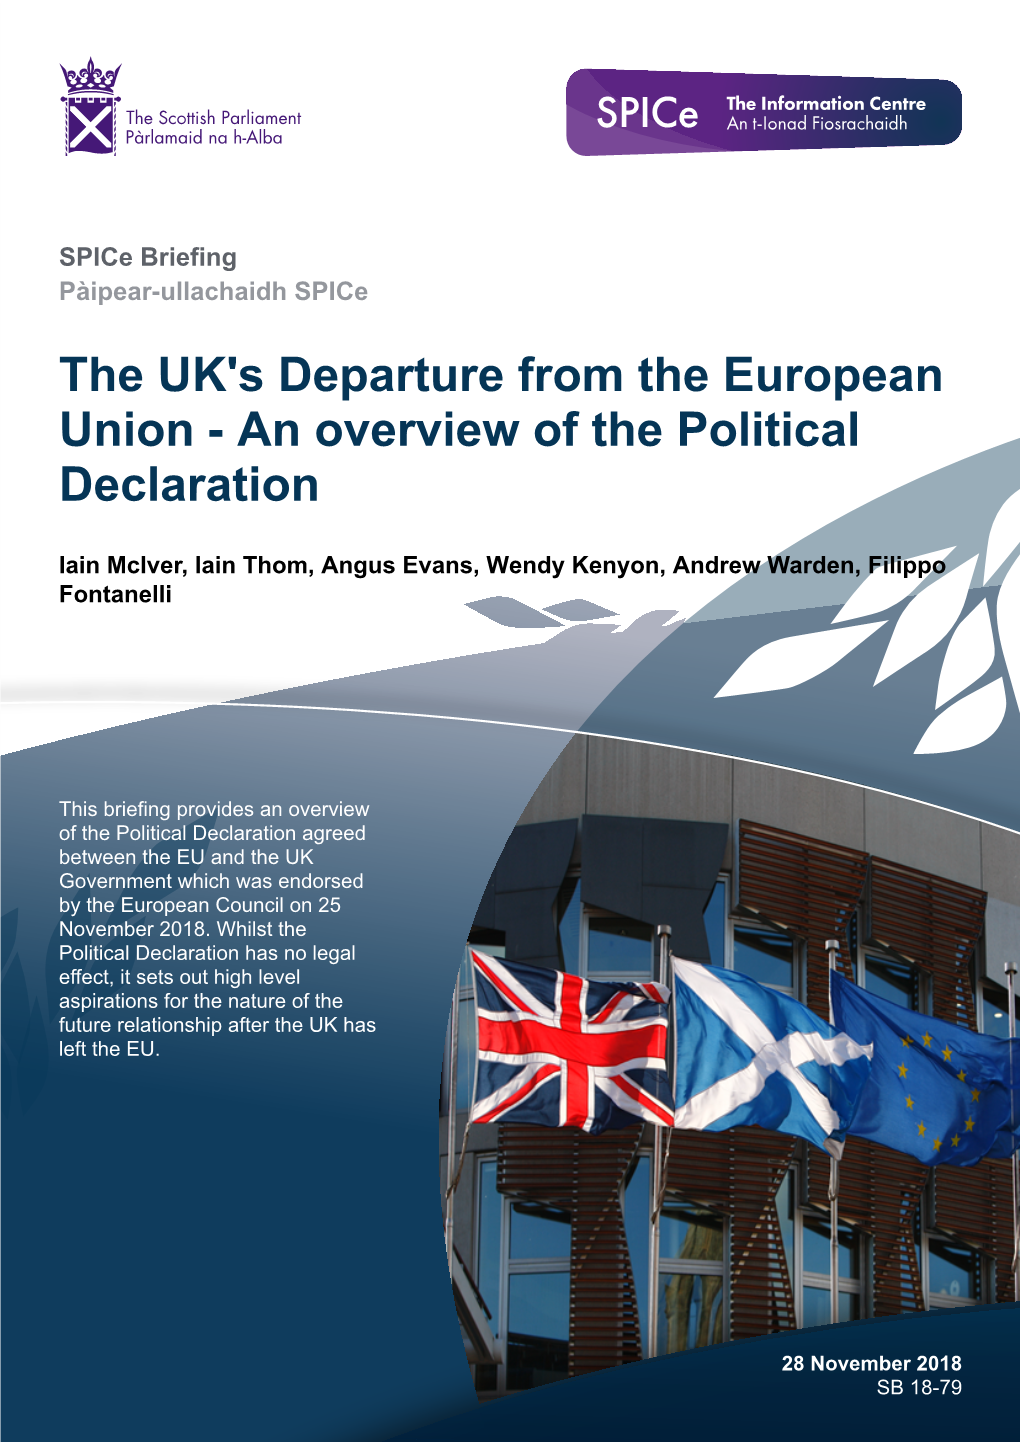 The UK's Departure from the European Union - an Overview of the Political Declaration